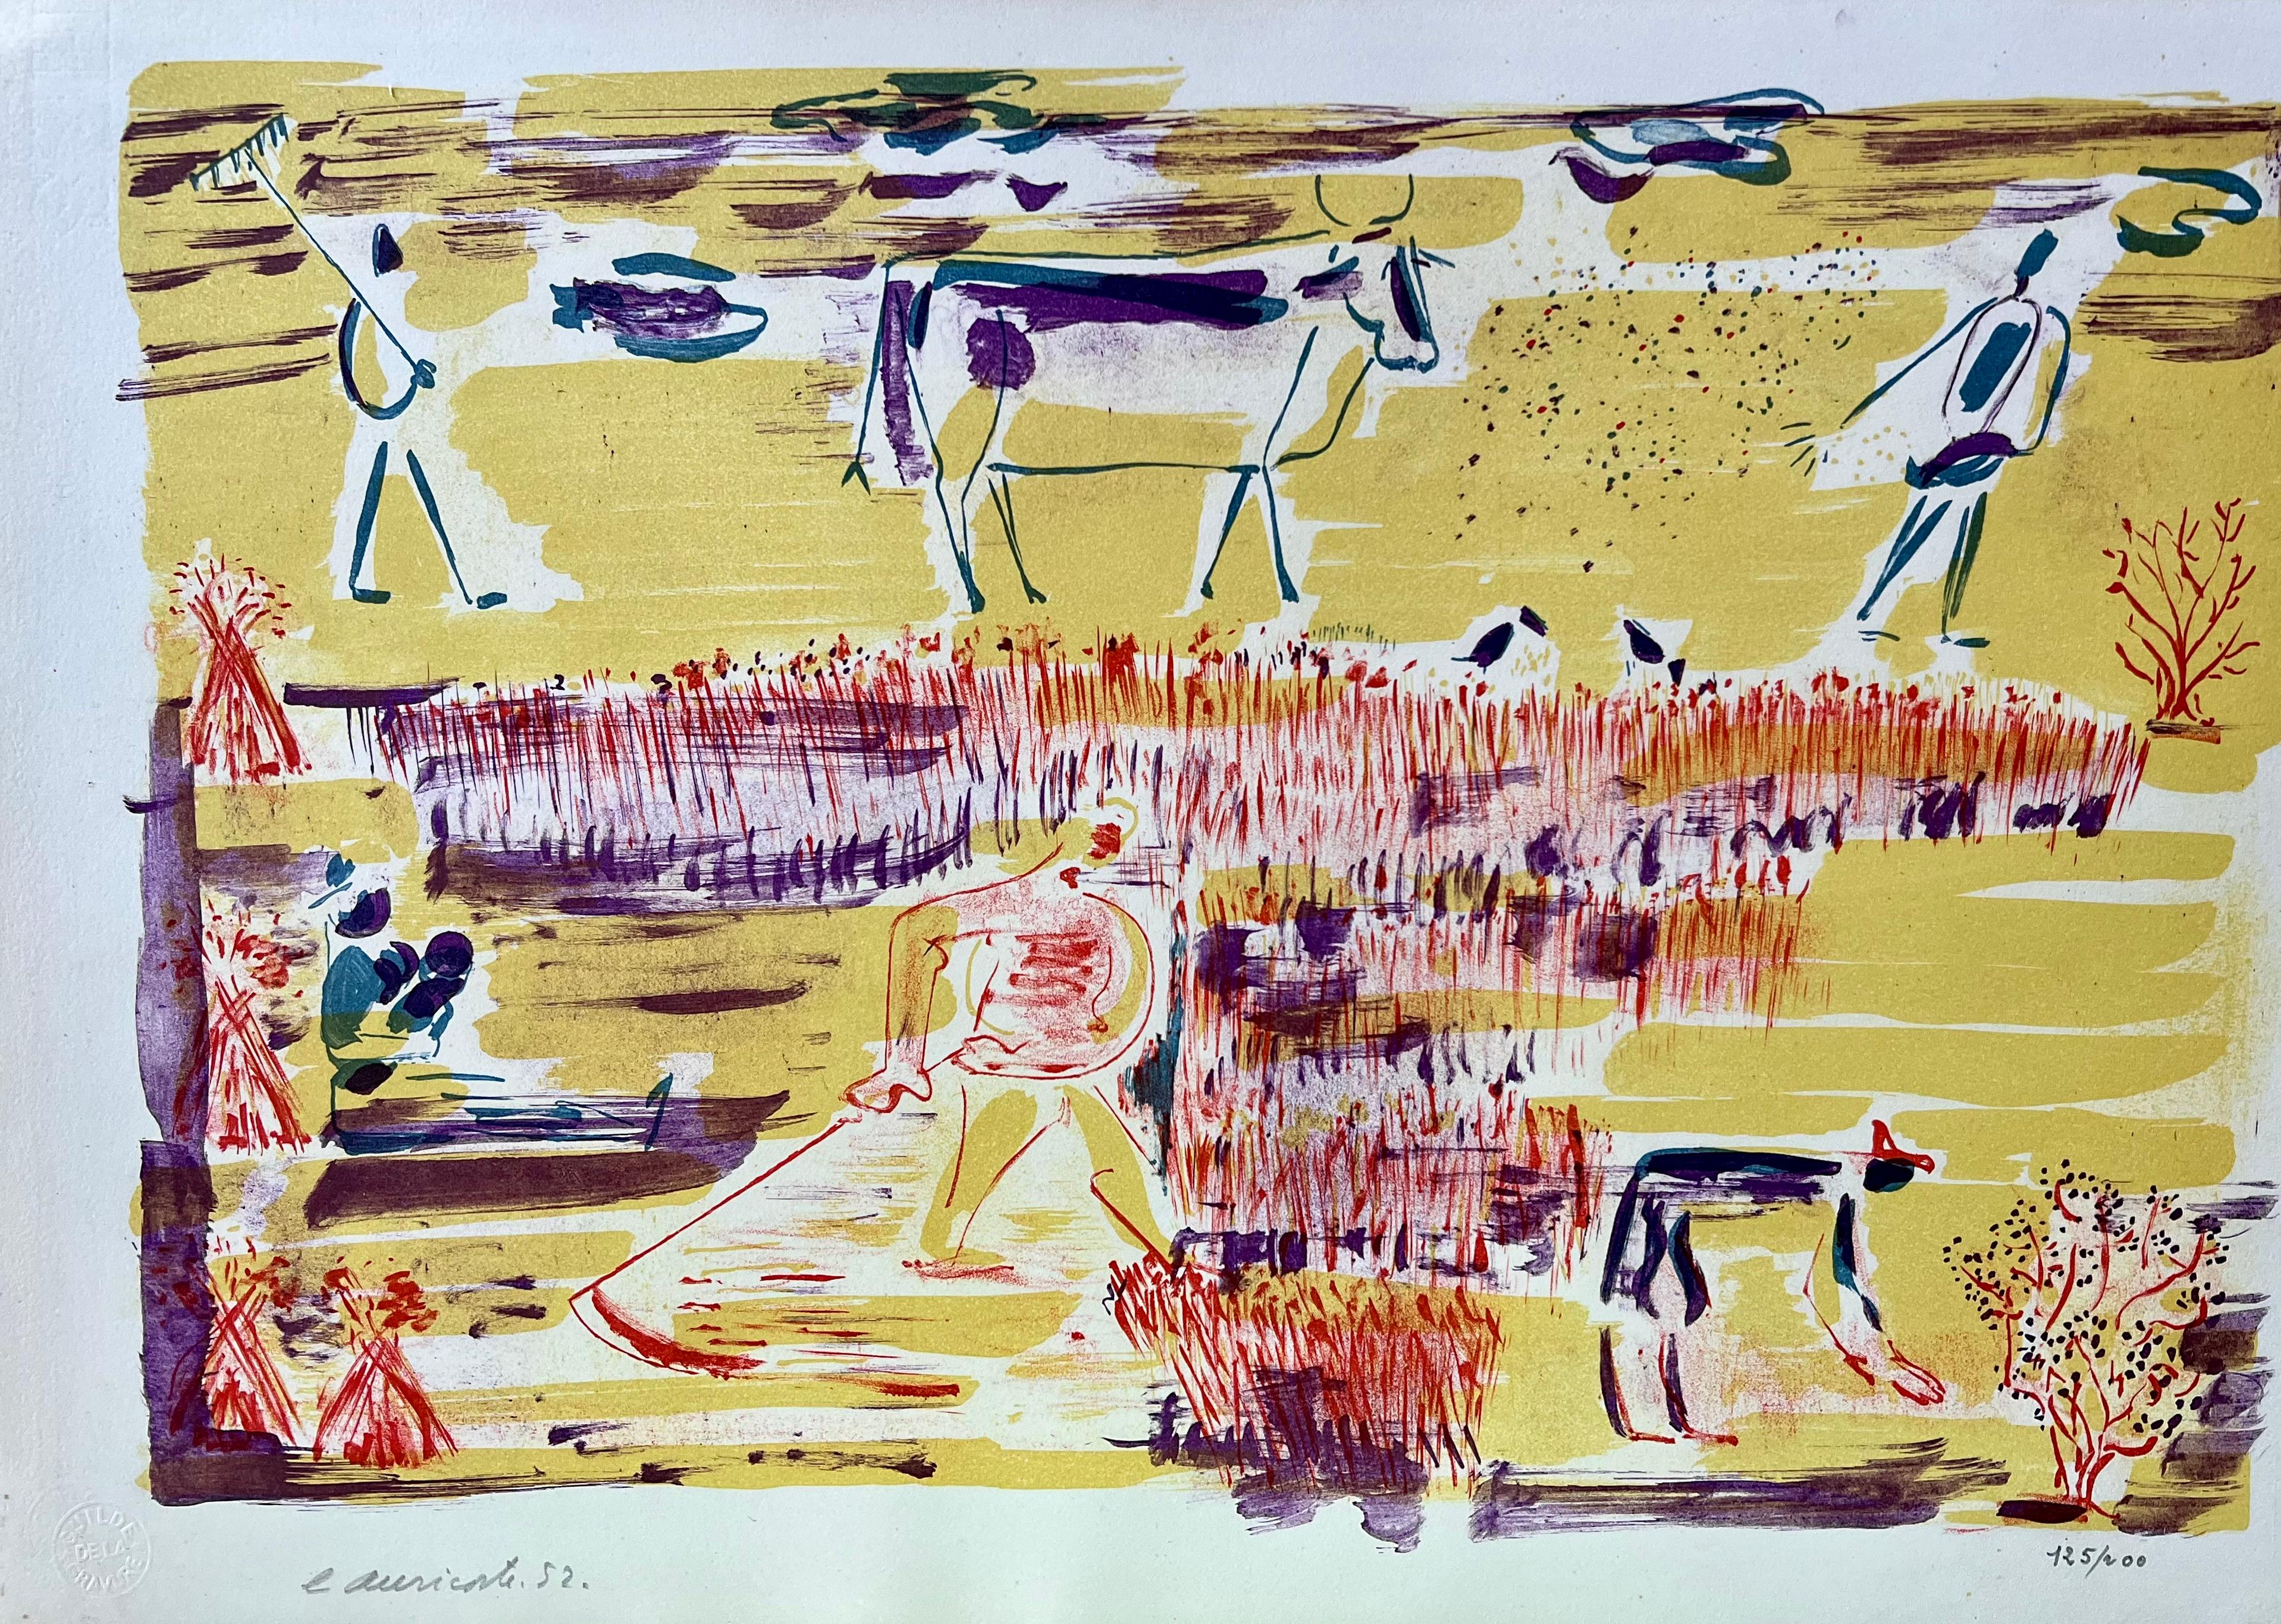 Auricoste Abstract Print - unknown ...  farm scene with workers and oxen, original lithograph